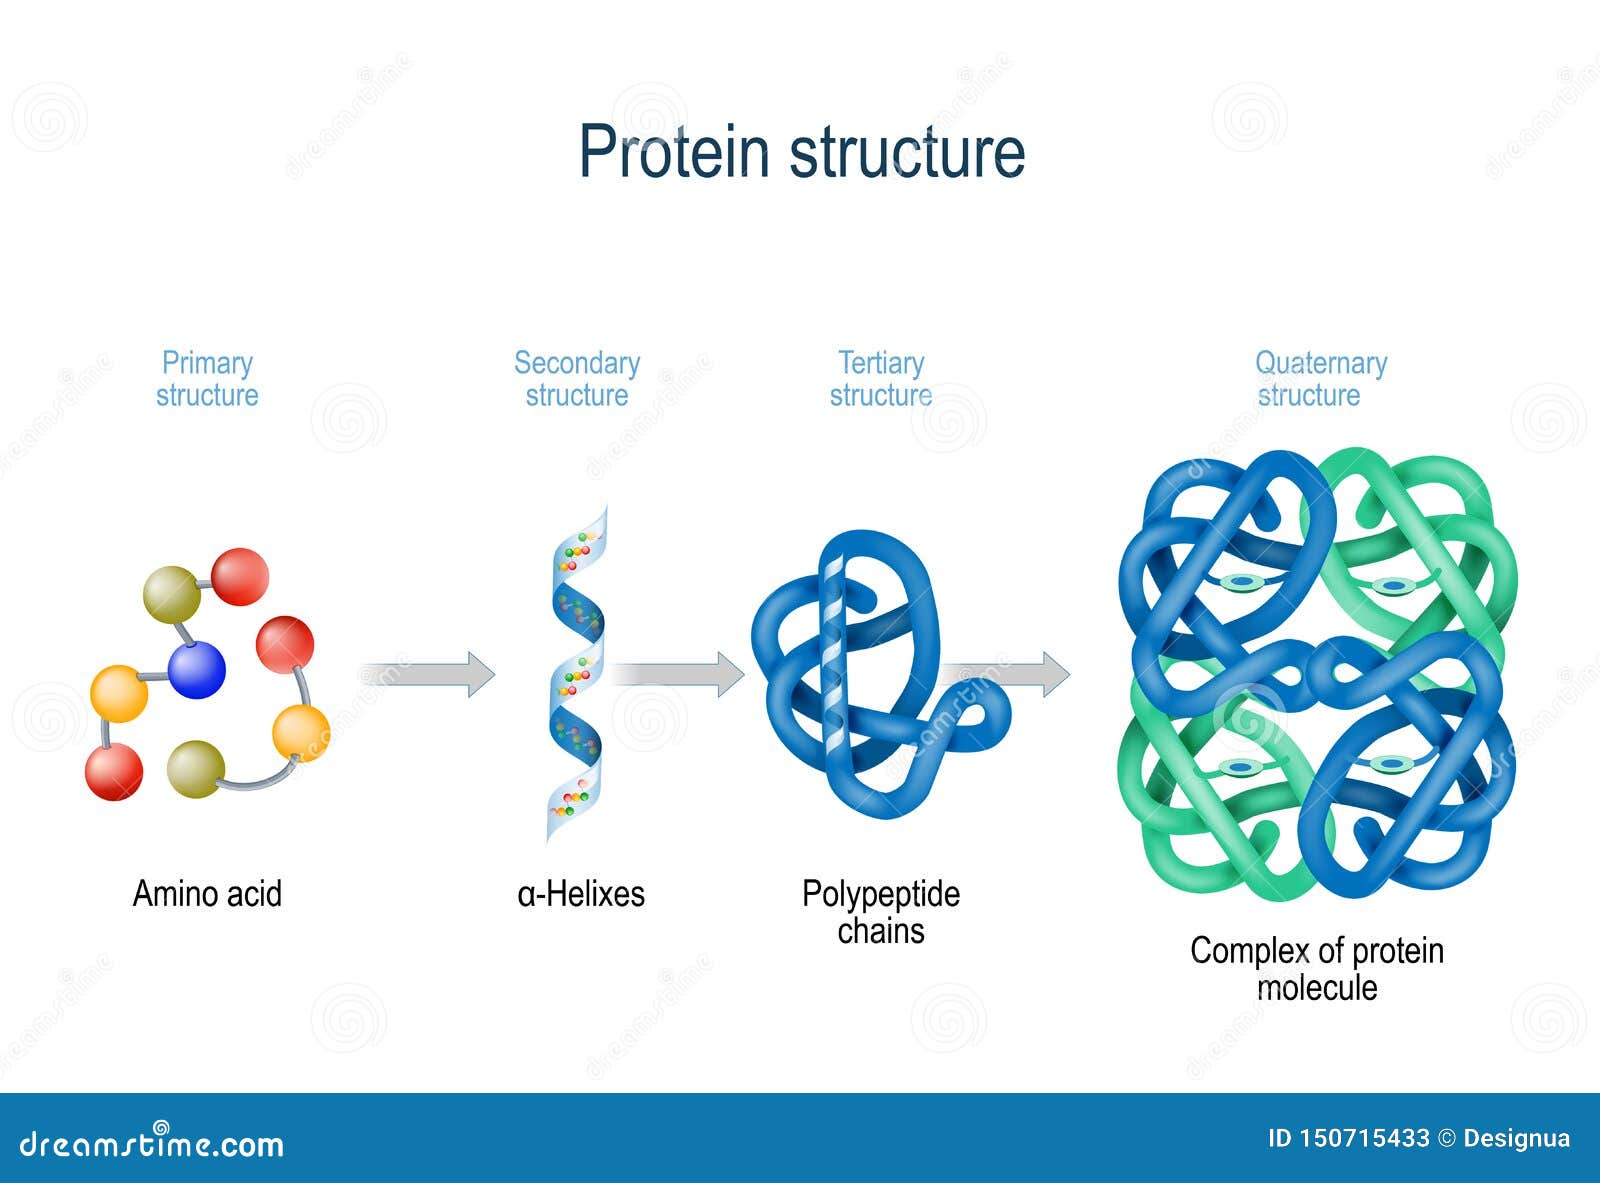 Primary structure of protein